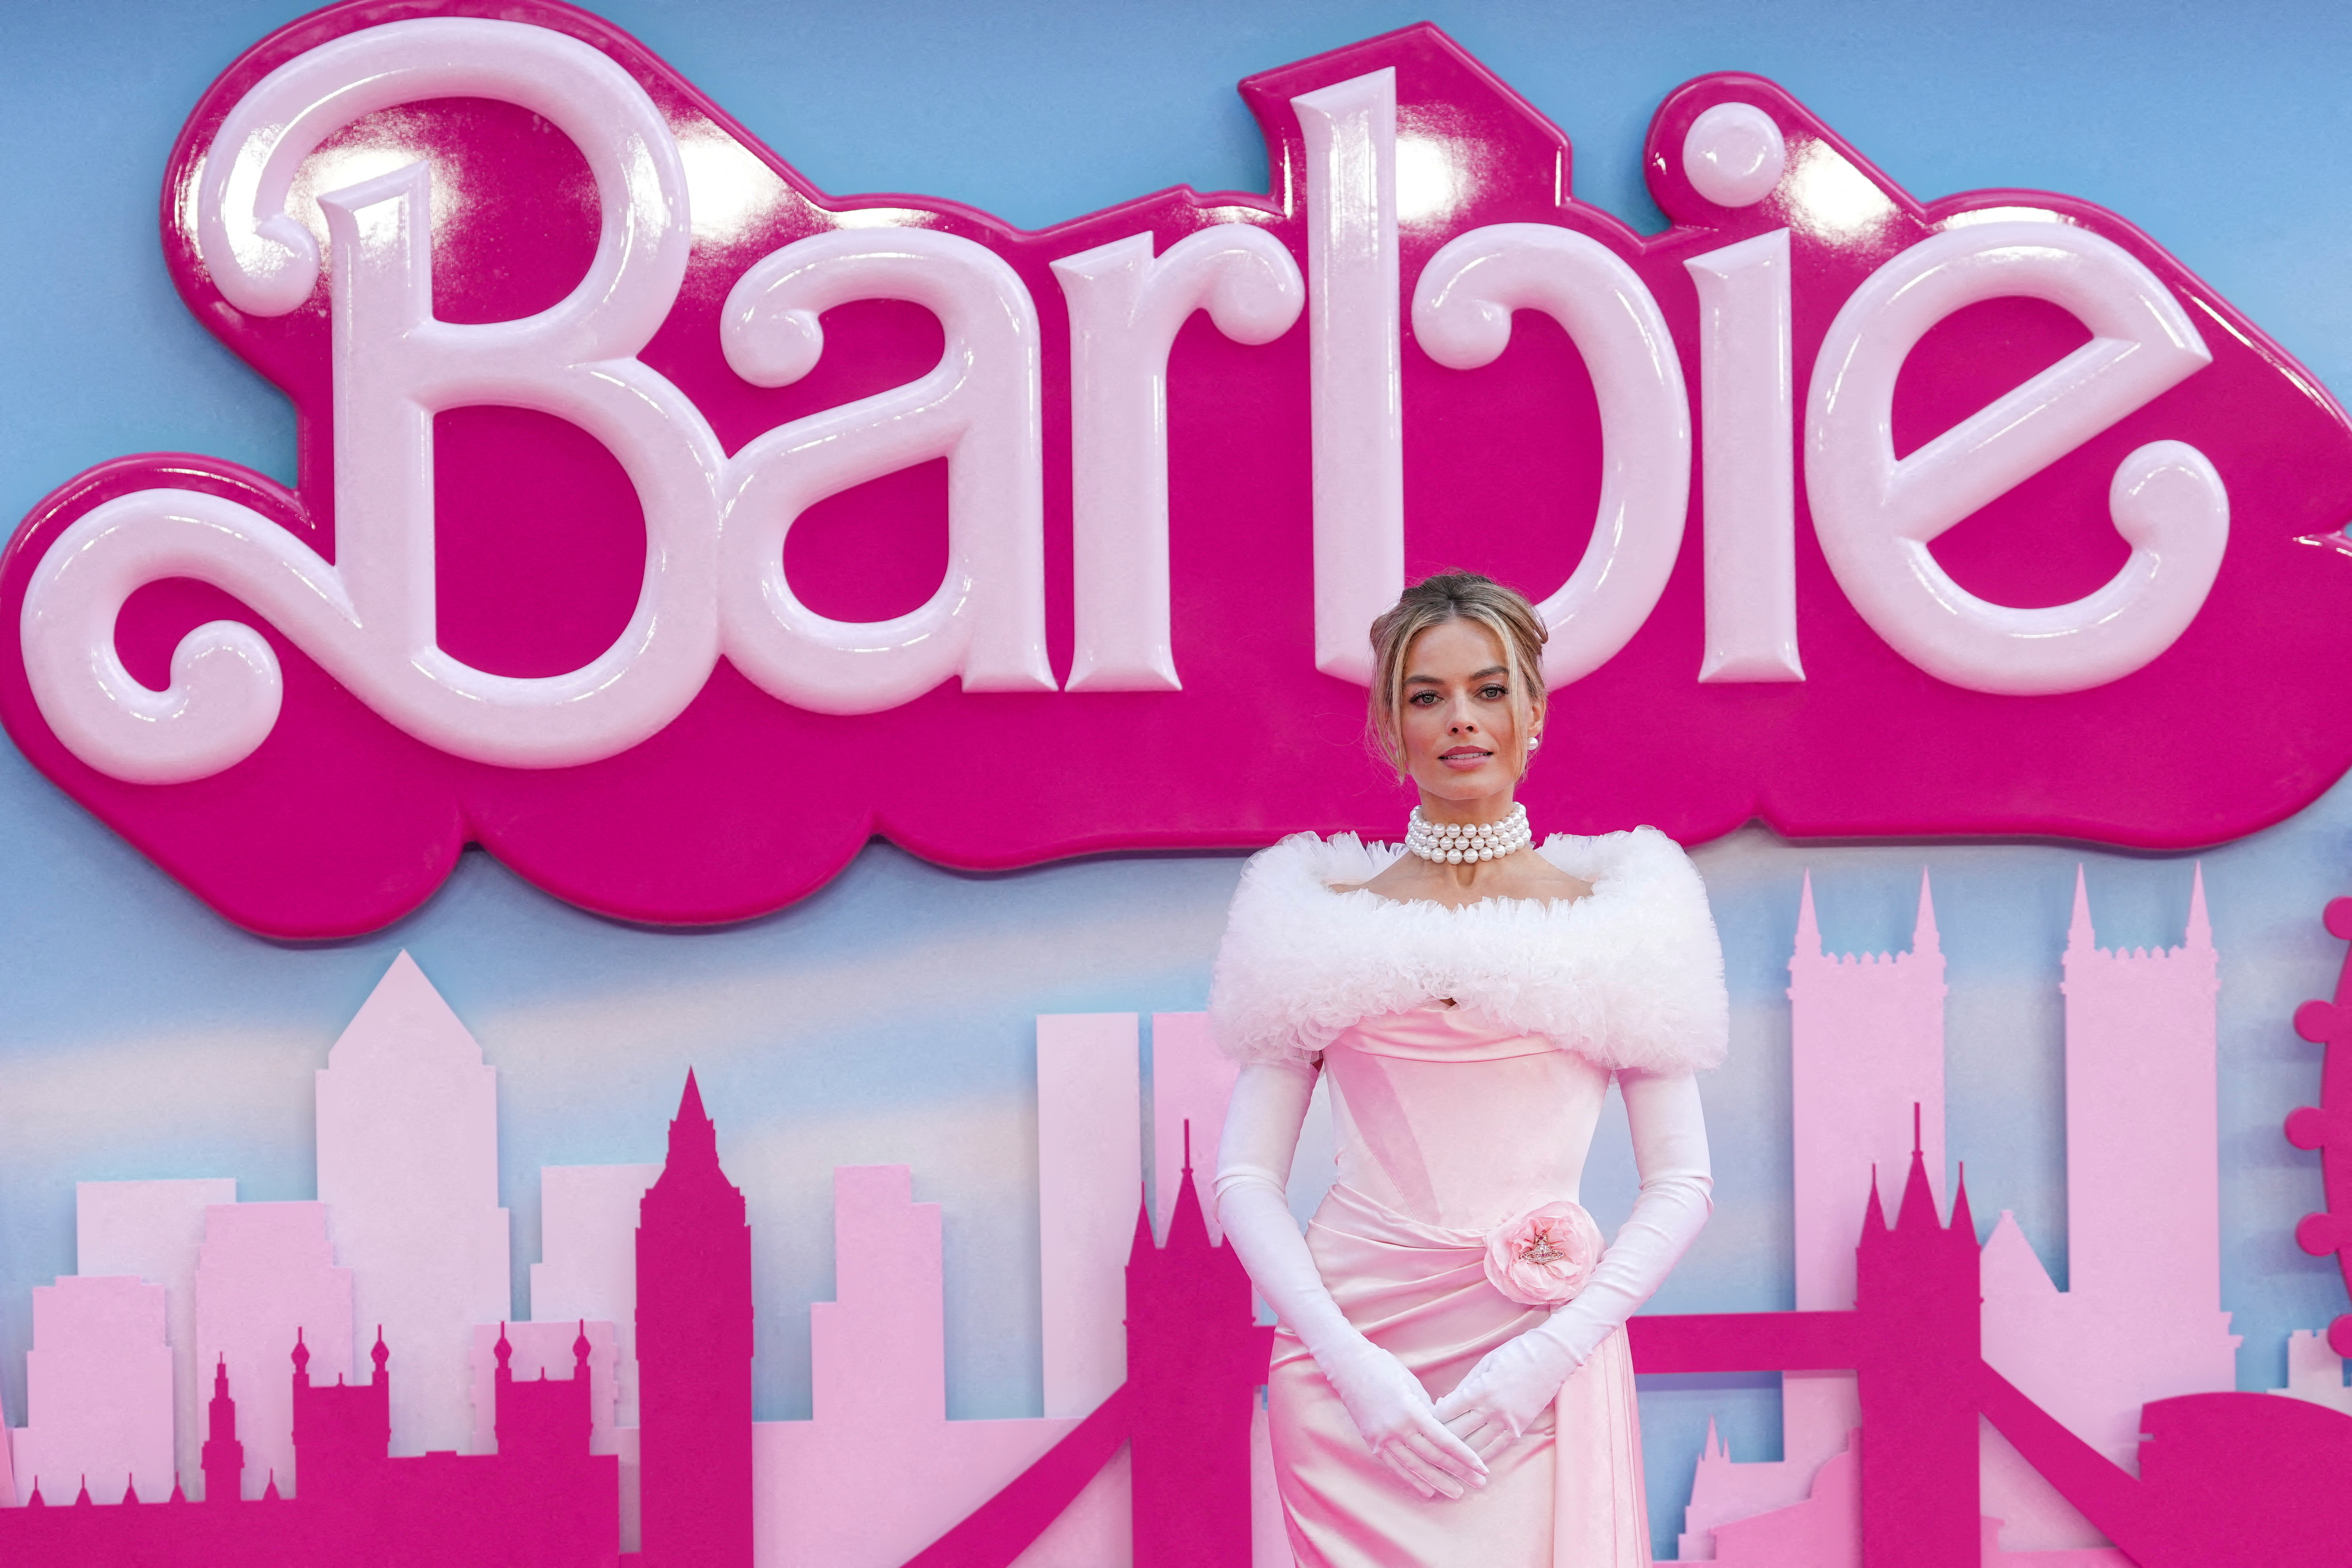 Algeria bans 'Barbie' movie, media and official source say